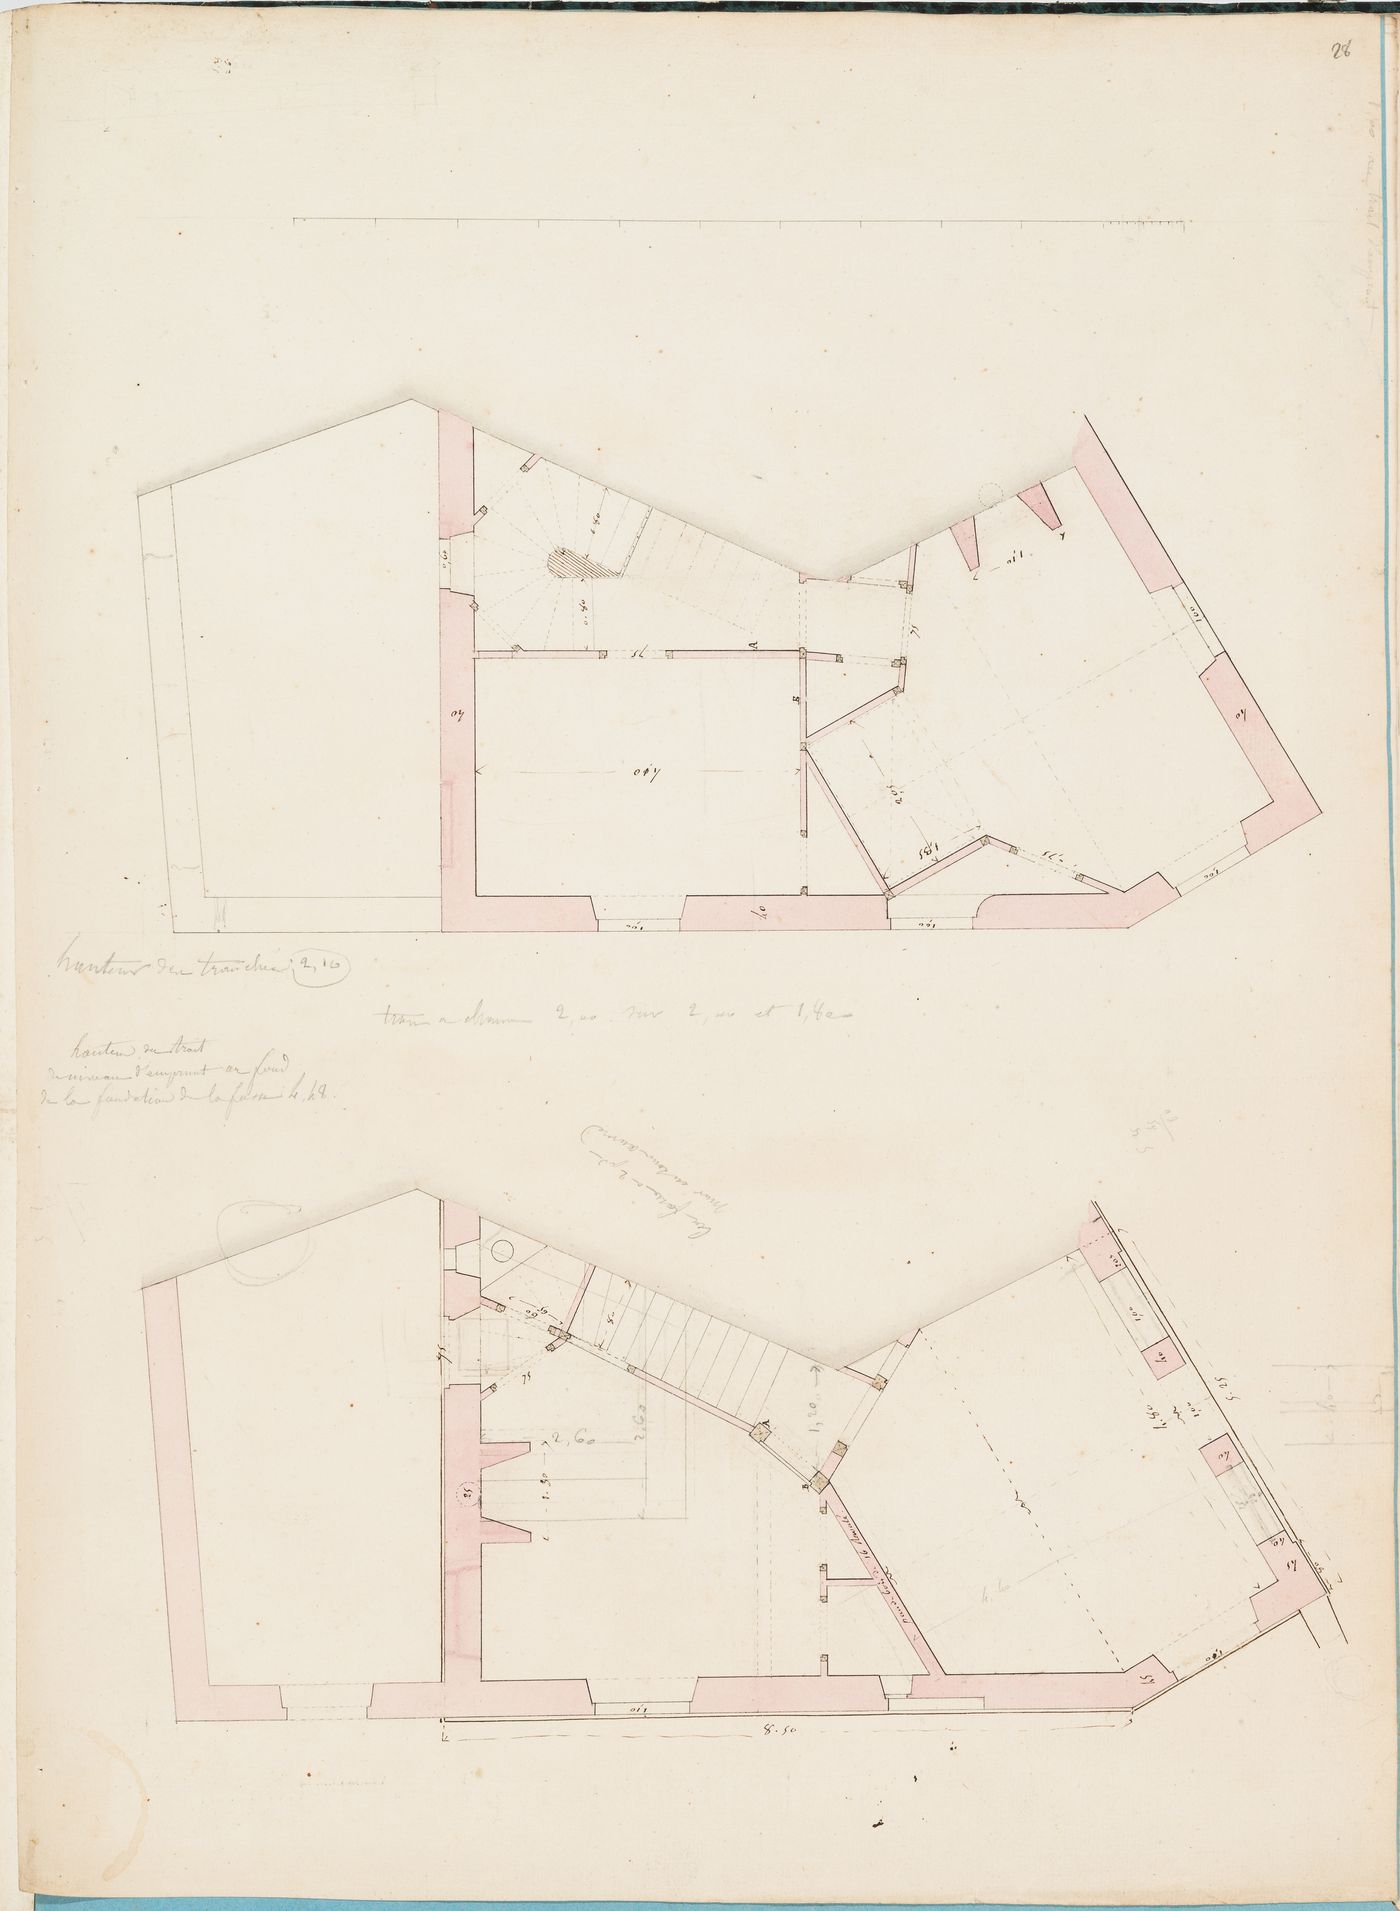 Plans for an unidentified building, probably for Parc de Clichy; verso: Roof plan and section for an unidentified building, possibly for Parc de Clichy